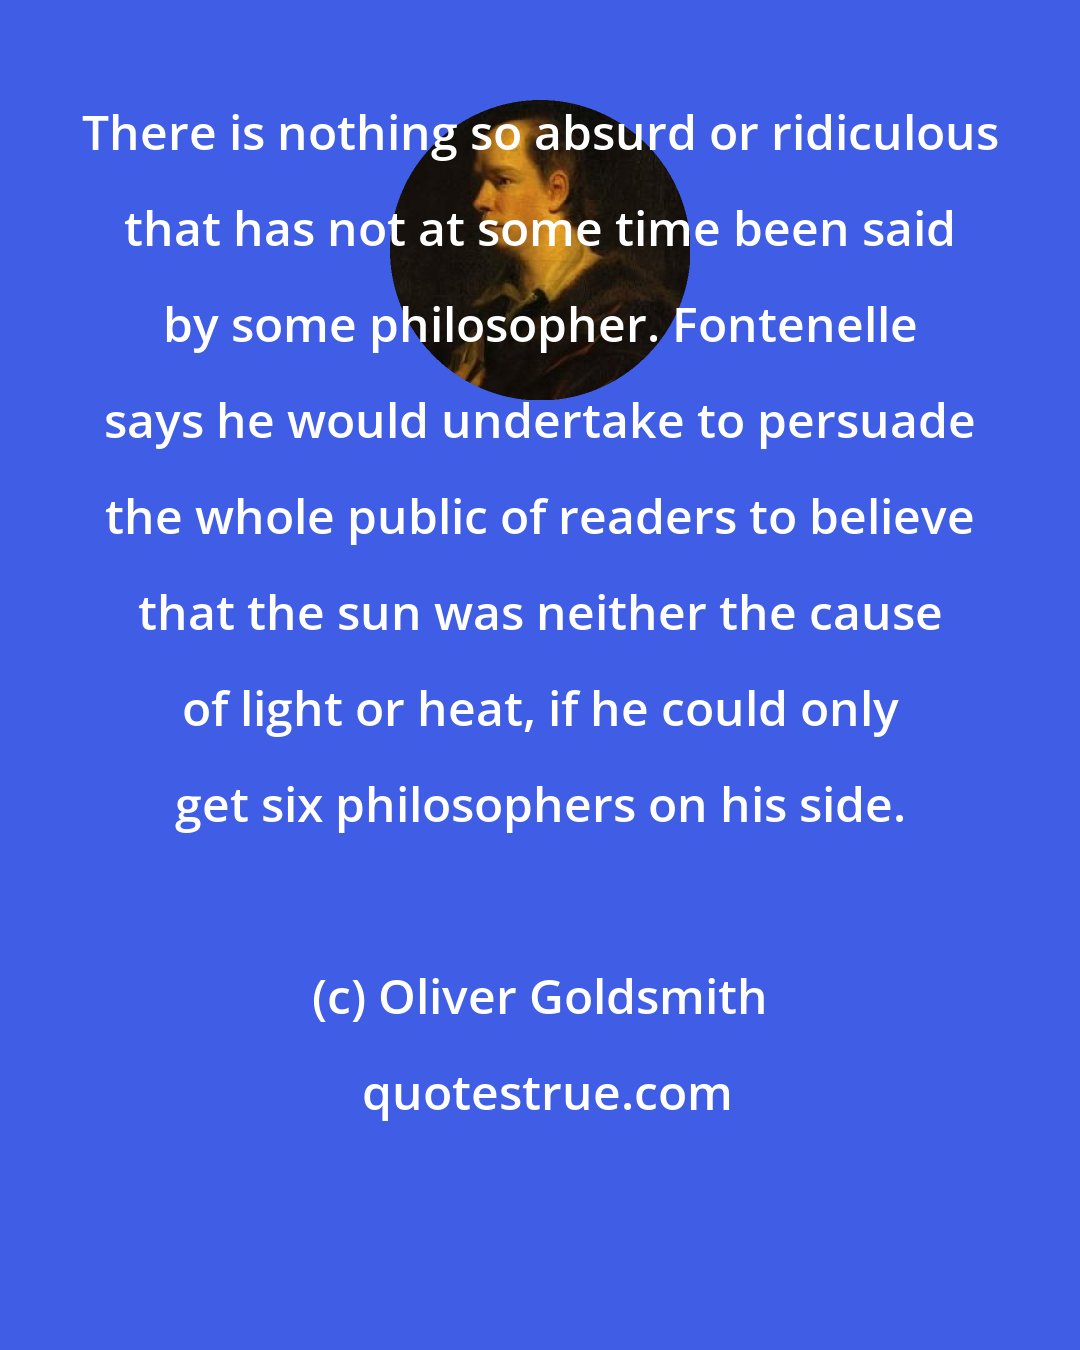 Oliver Goldsmith: There is nothing so absurd or ridiculous that has not at some time been said by some philosopher. Fontenelle says he would undertake to persuade the whole public of readers to believe that the sun was neither the cause of light or heat, if he could only get six philosophers on his side.